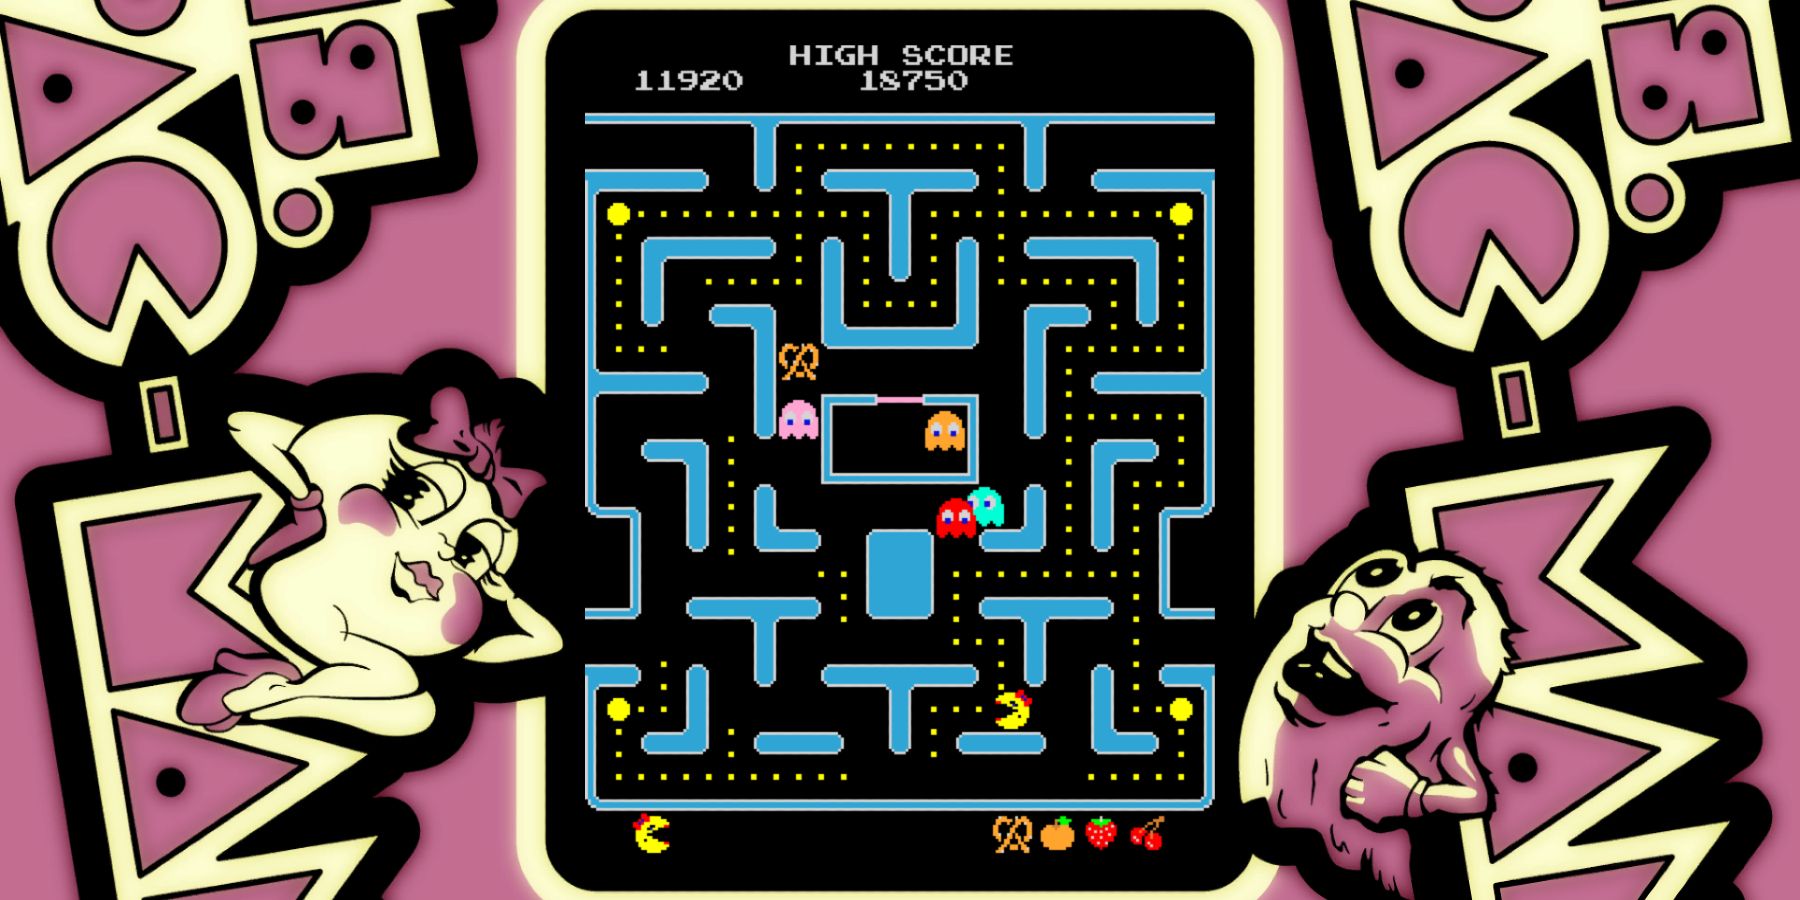 Screenshot from the classic arcade game Ms. Pac-Man